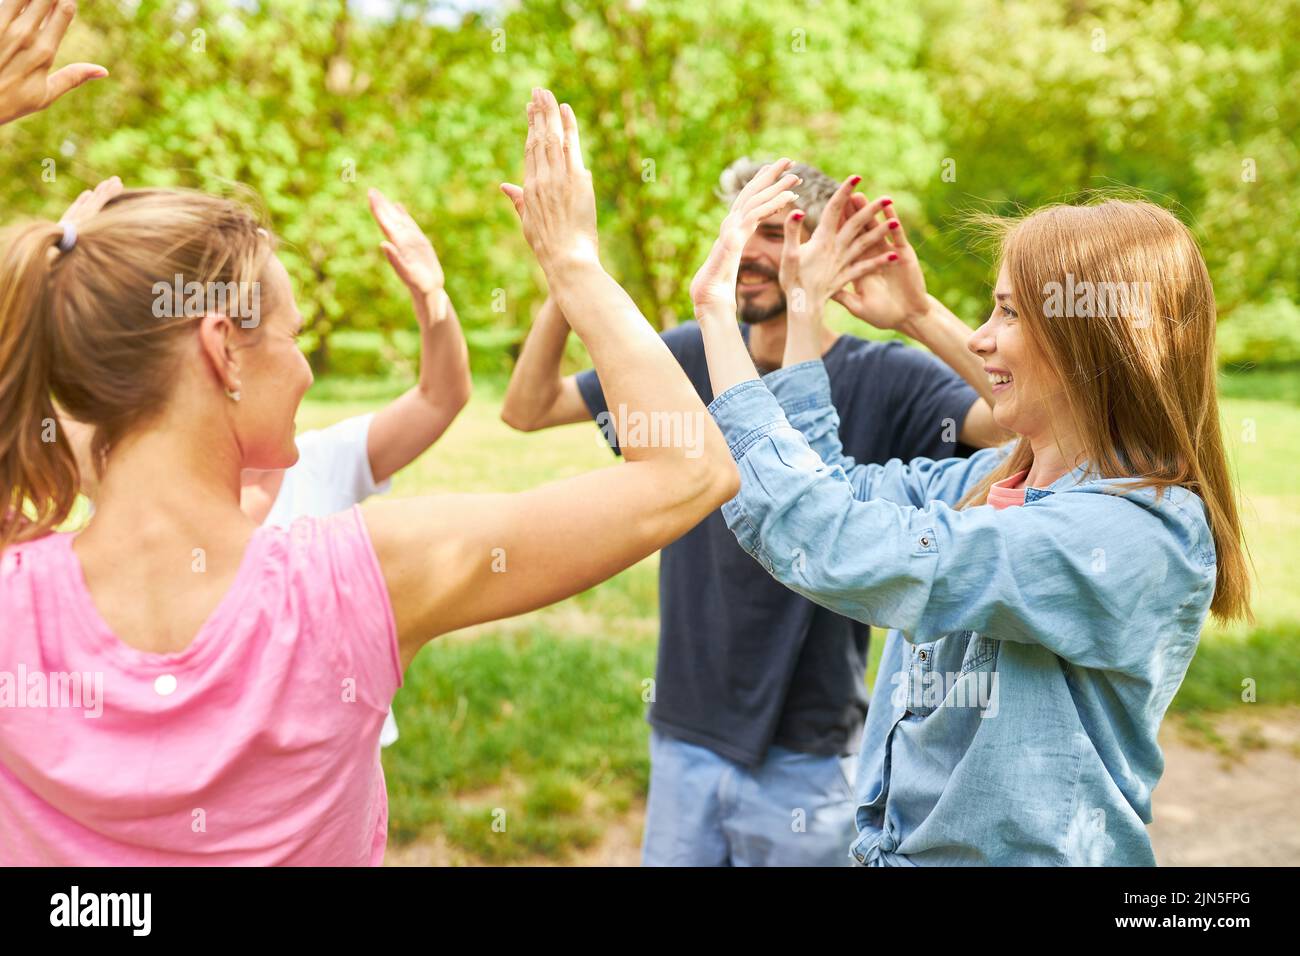 Group of young people have fun giving high five for motivation in outdoor workshop Stock Photo